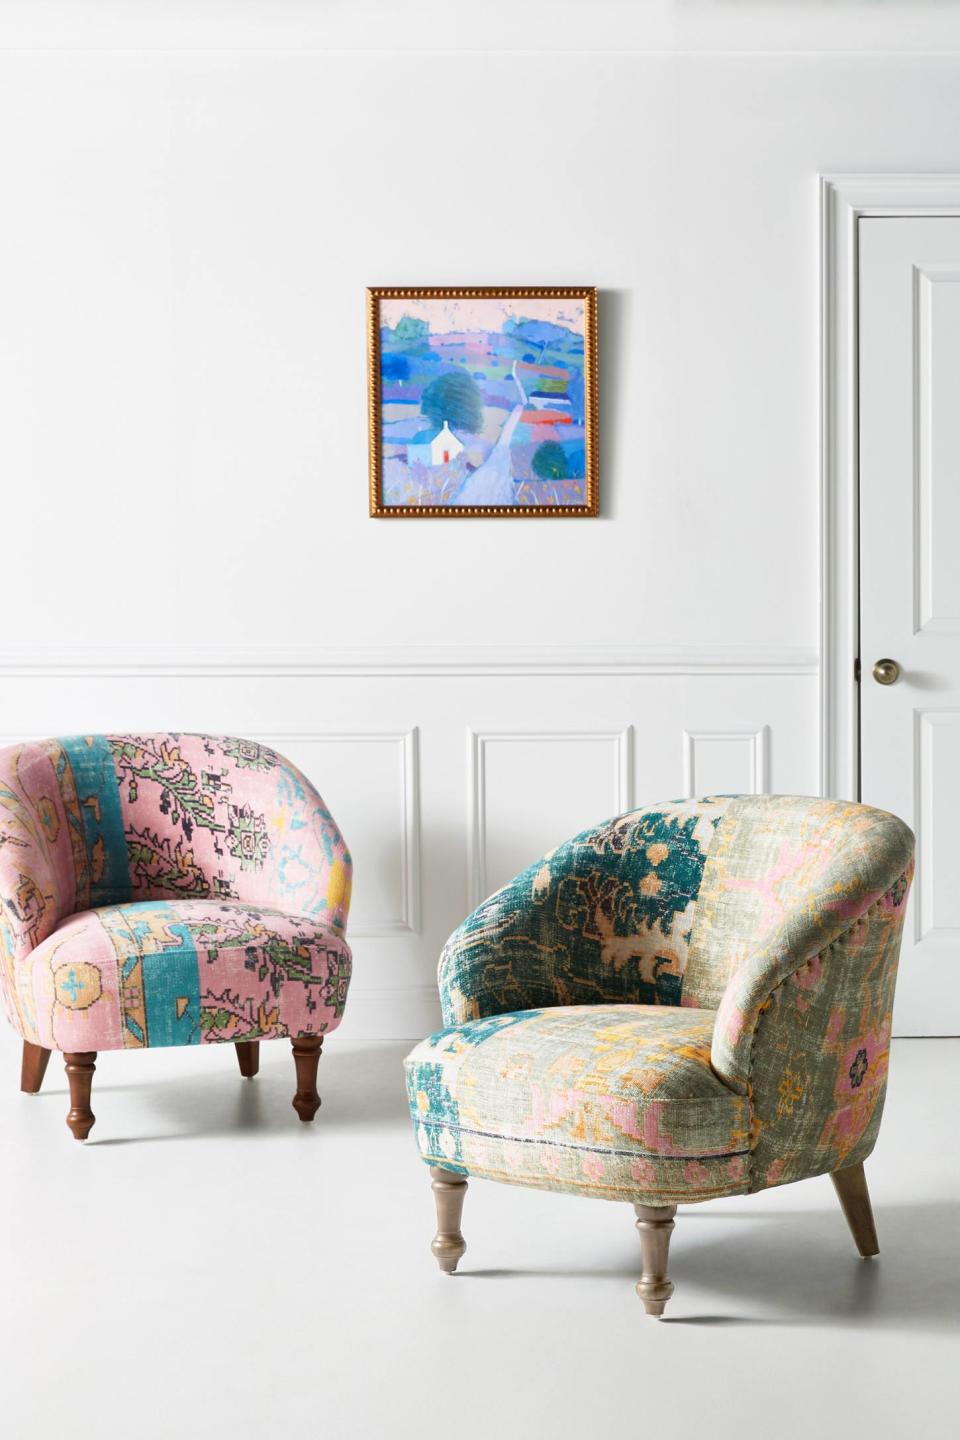 2) Rug-Printed Accent Chair